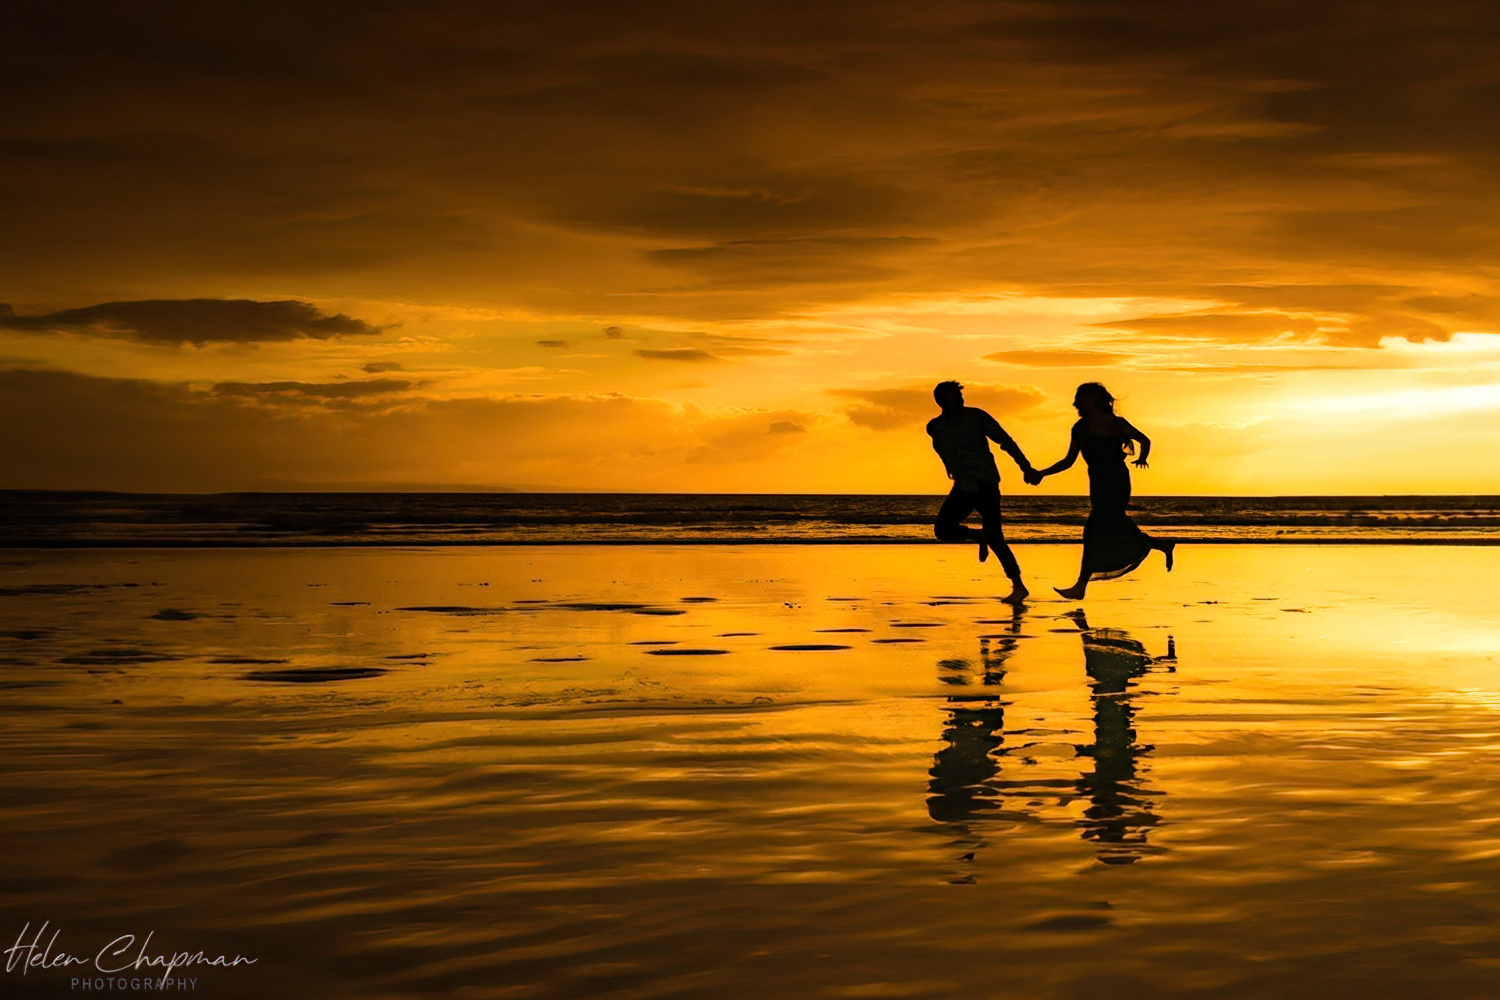 Couple running on beach at sunset with reflections.